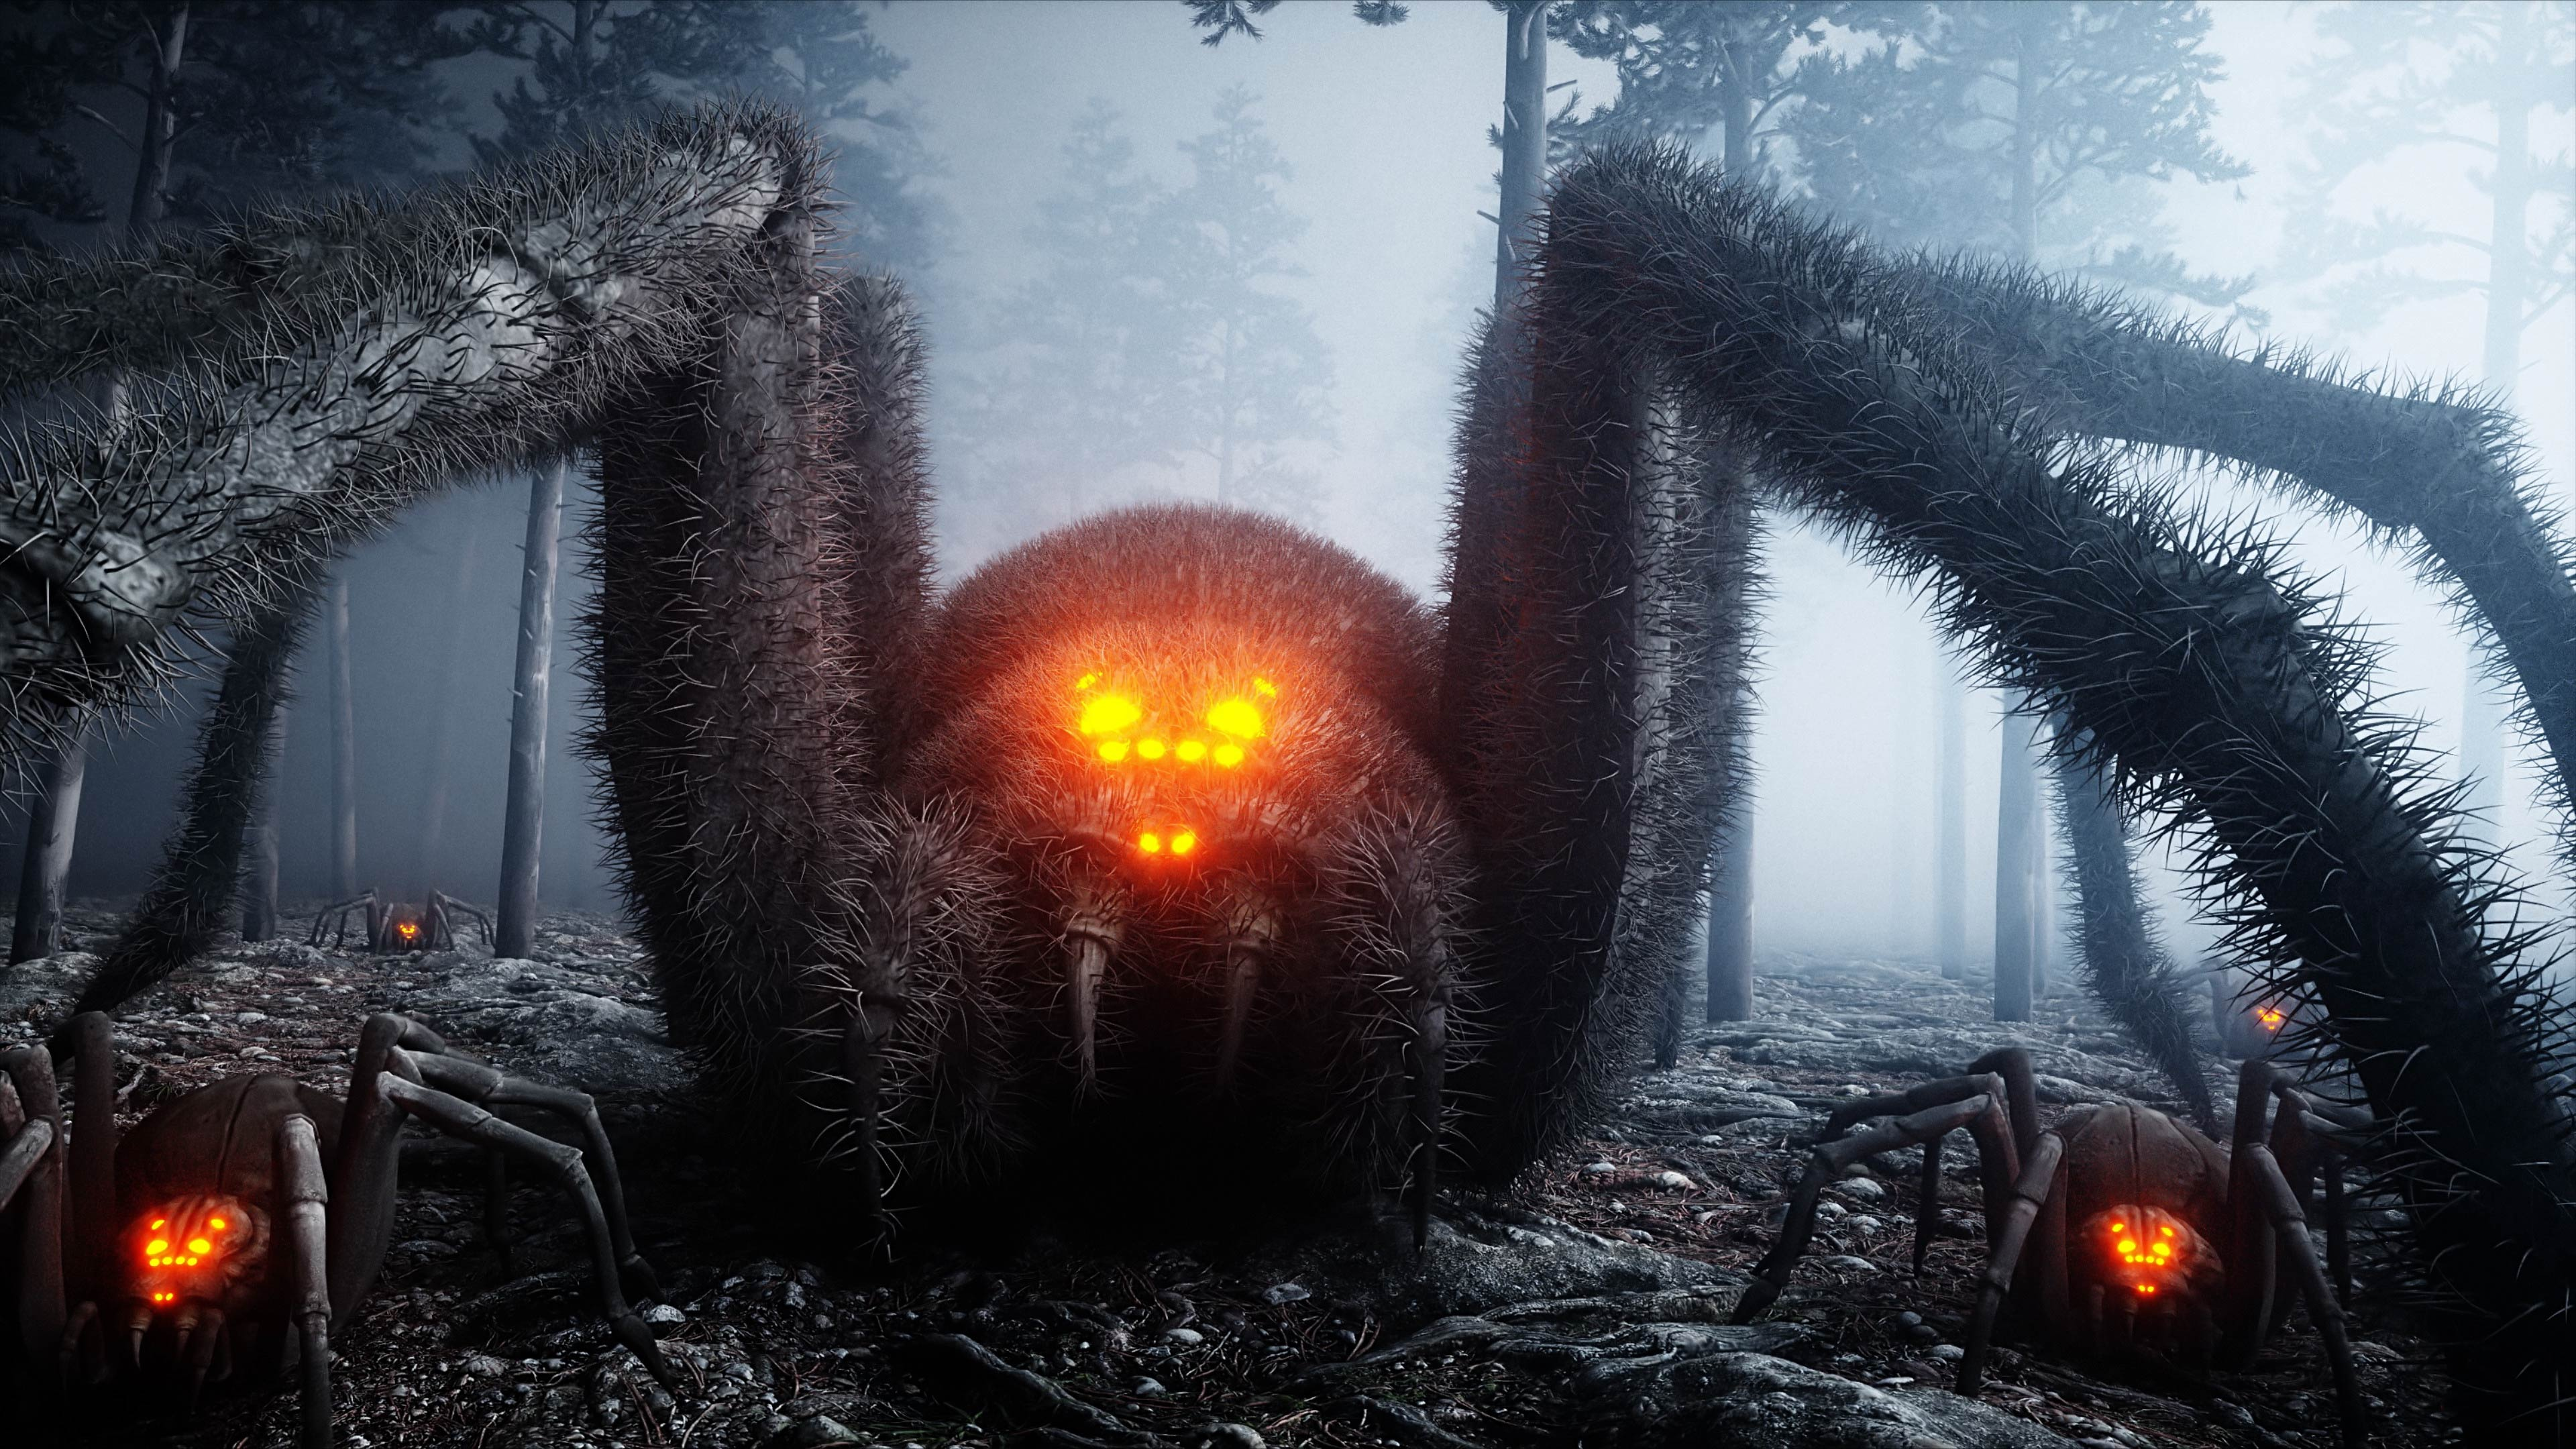 Giant Spiders